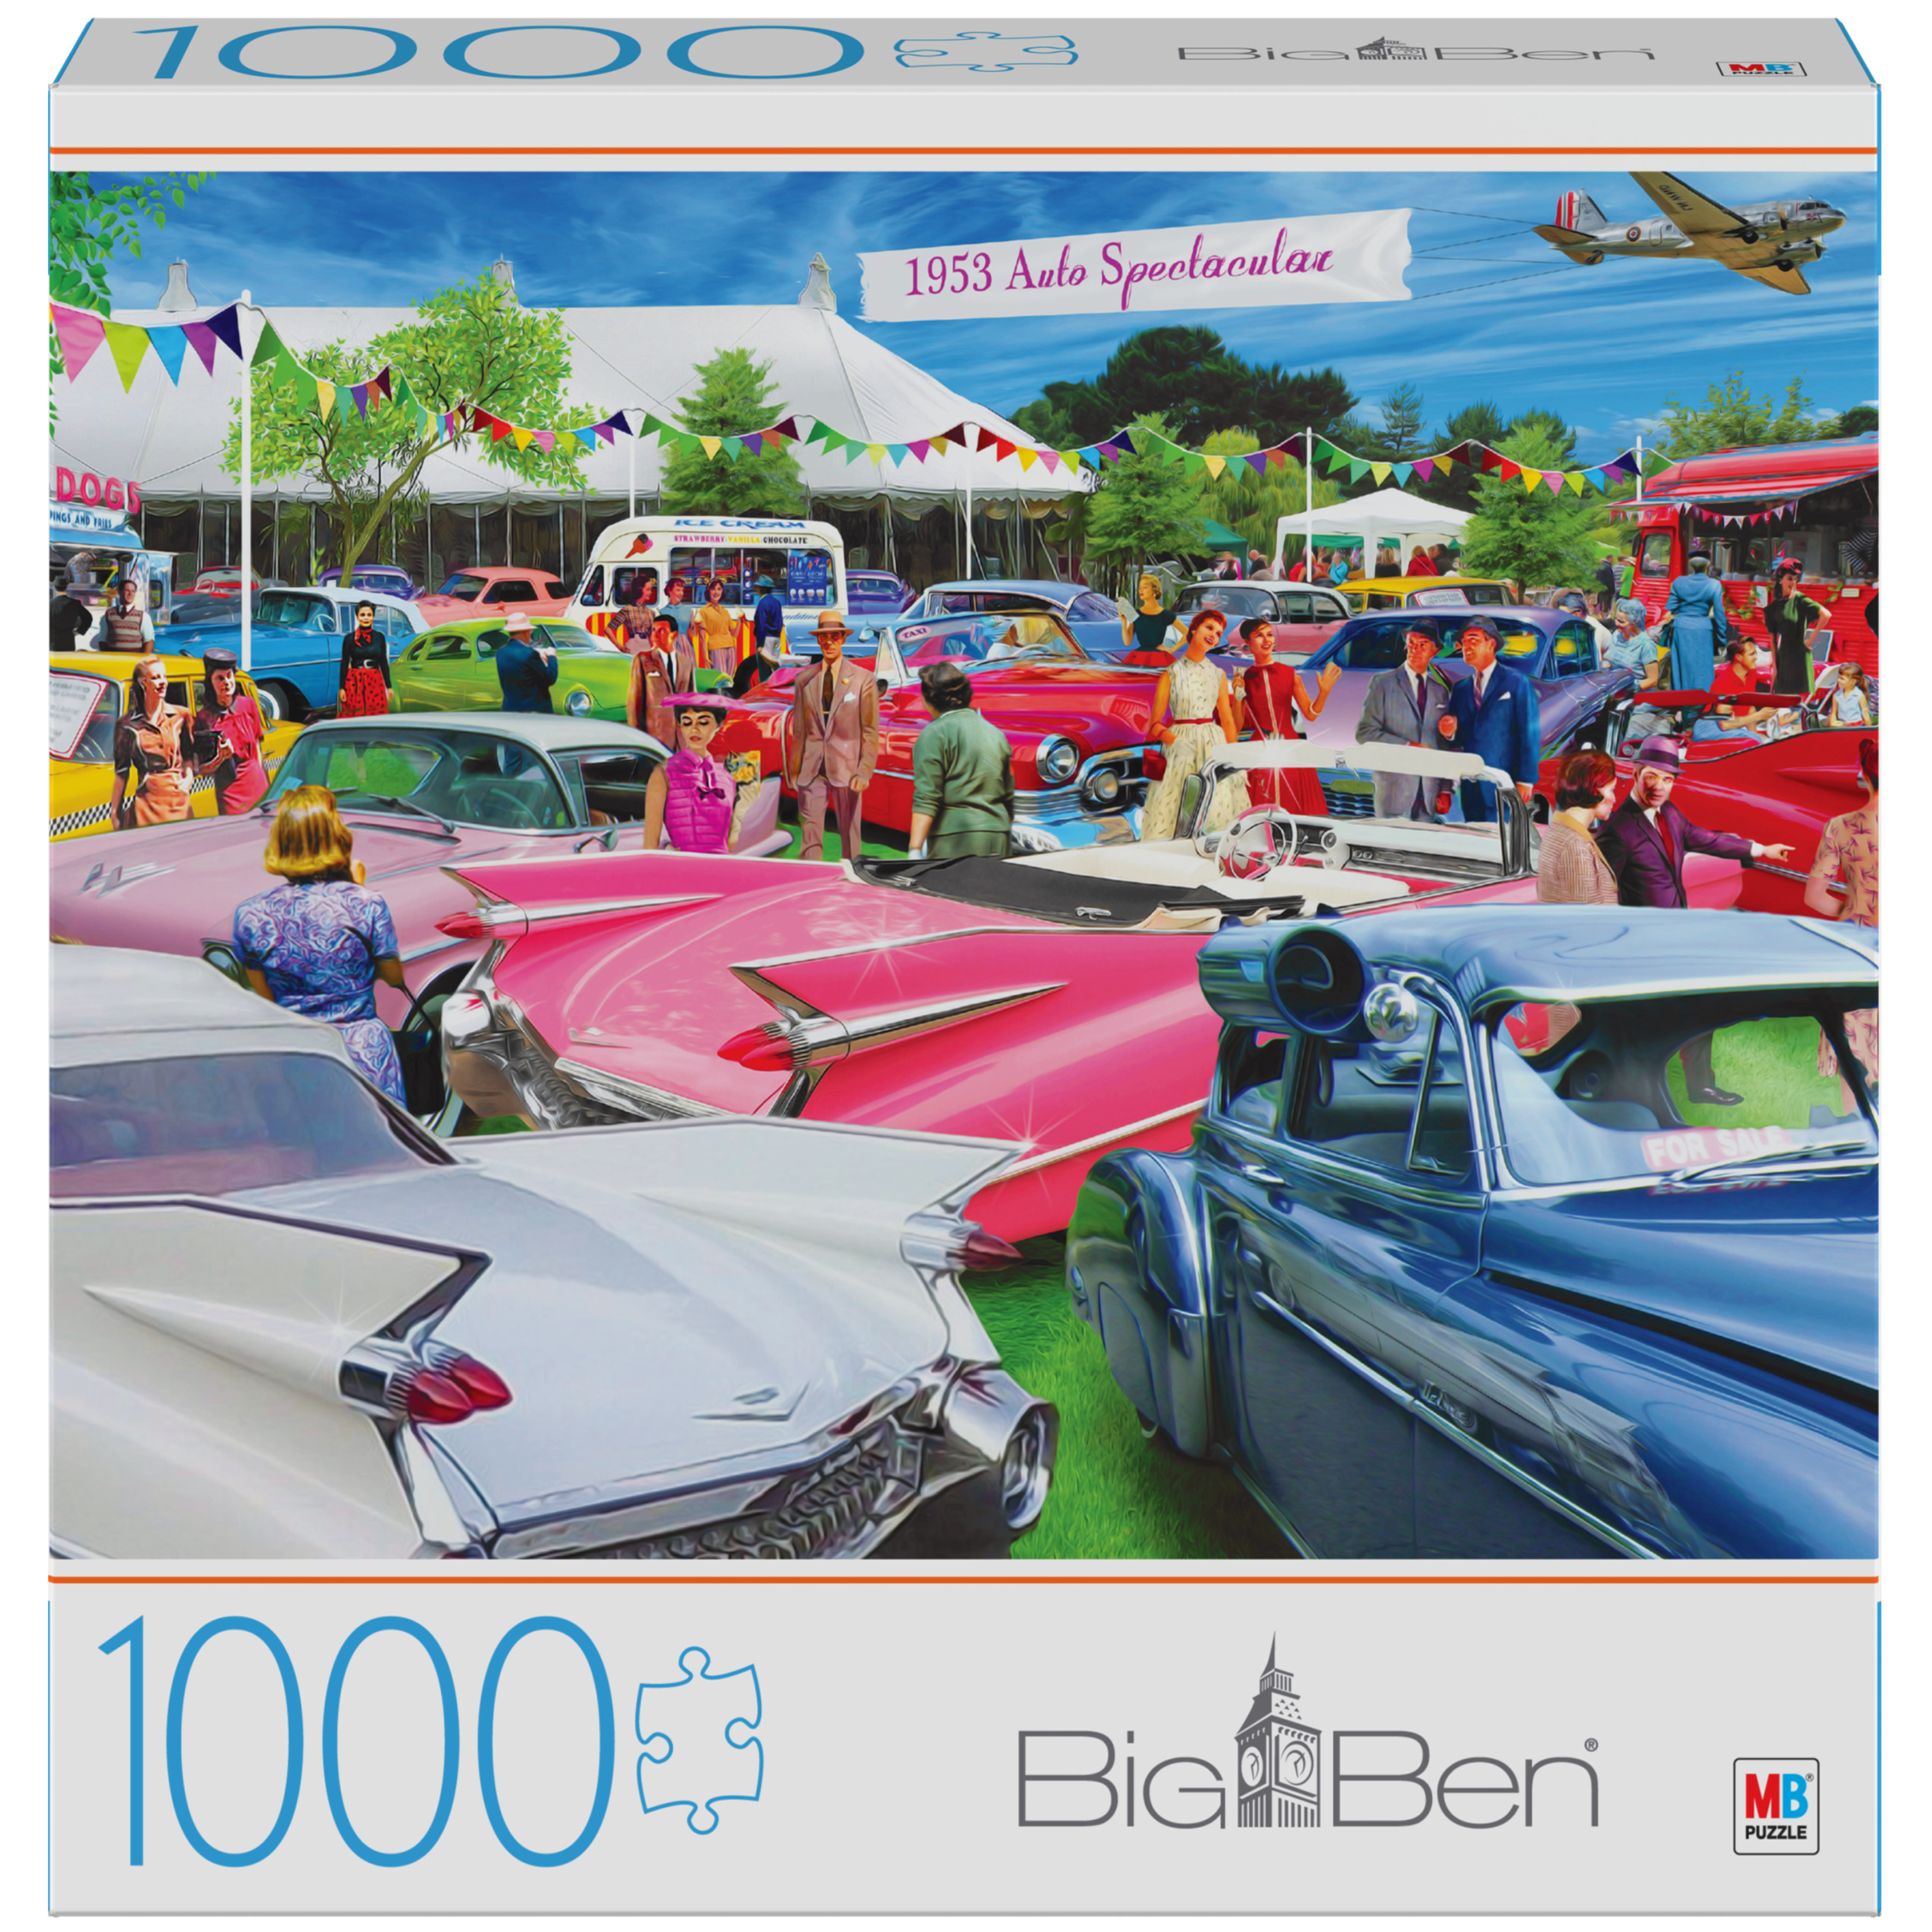 Big Ben Milton Bradley 1000-Piece Jigsaw Puzzle, for Adults and Kids Ages 8 and up (Styles Will Vary) - image 2 of 8